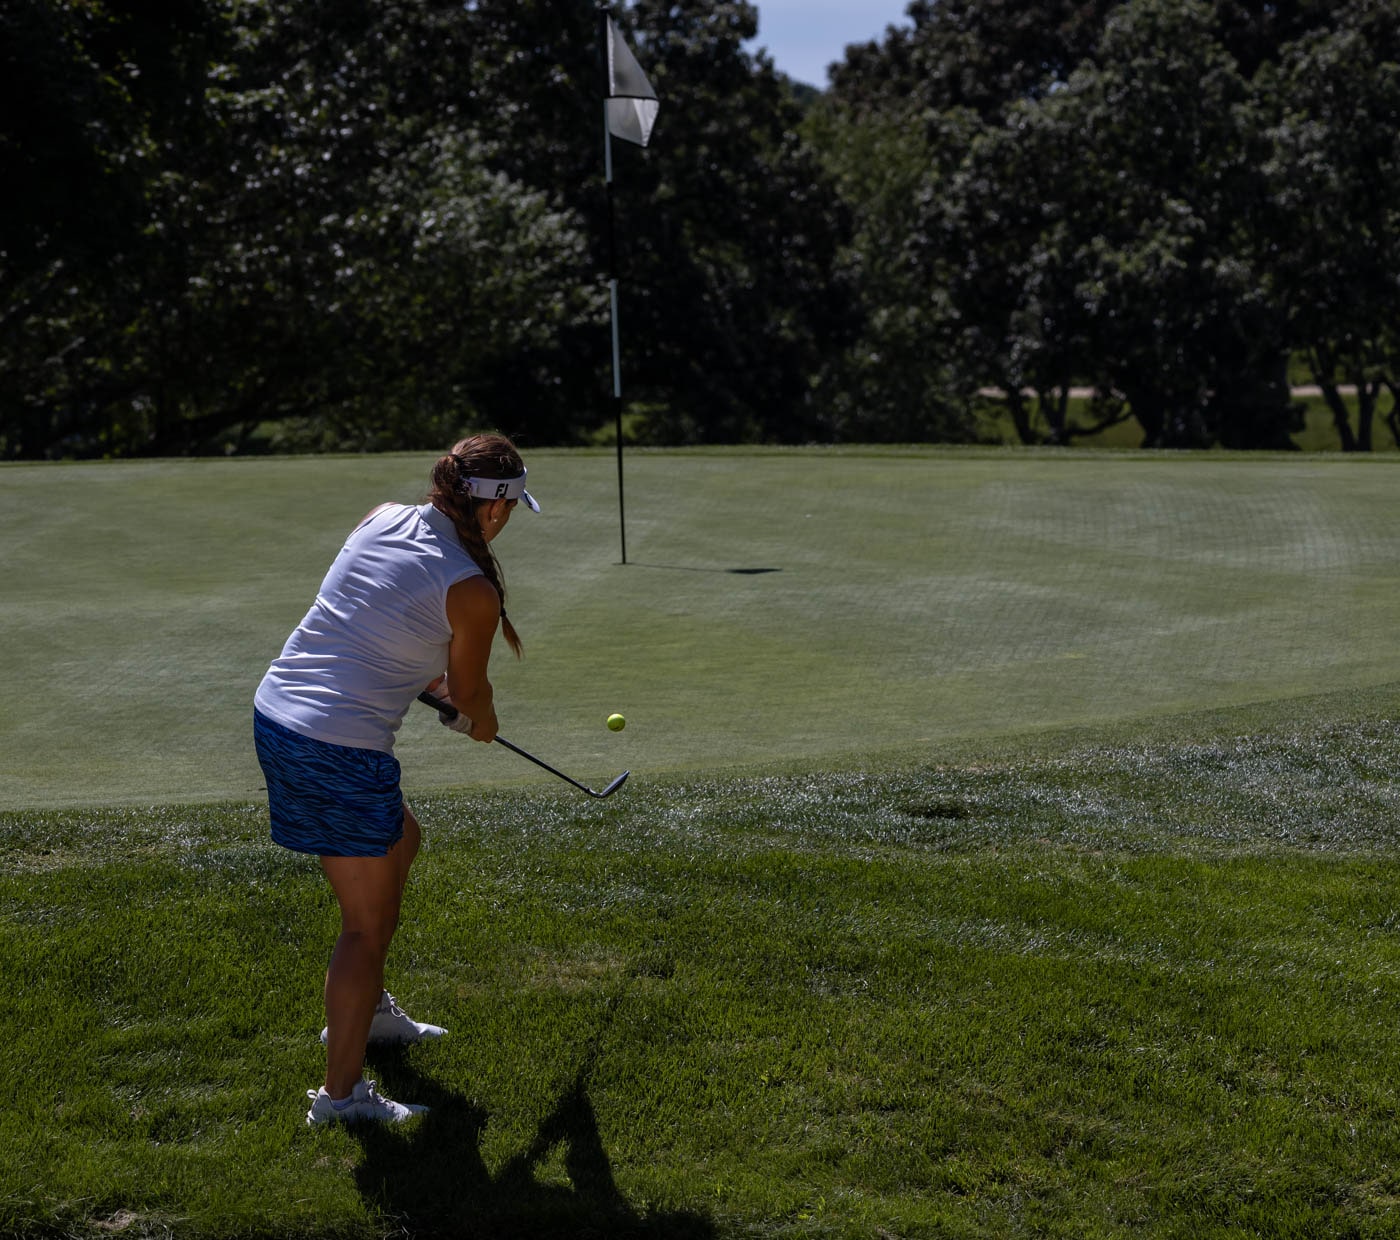 Country-Club-Of-New-Bedford FB-2023-Womens-FB-Gallery August-2023-Country-Club-Of-New-Bedford-FB-2023-Womens-FB-Gallery August-2023-Womens-FB-Gallery-Thursday-Photos-Image-39